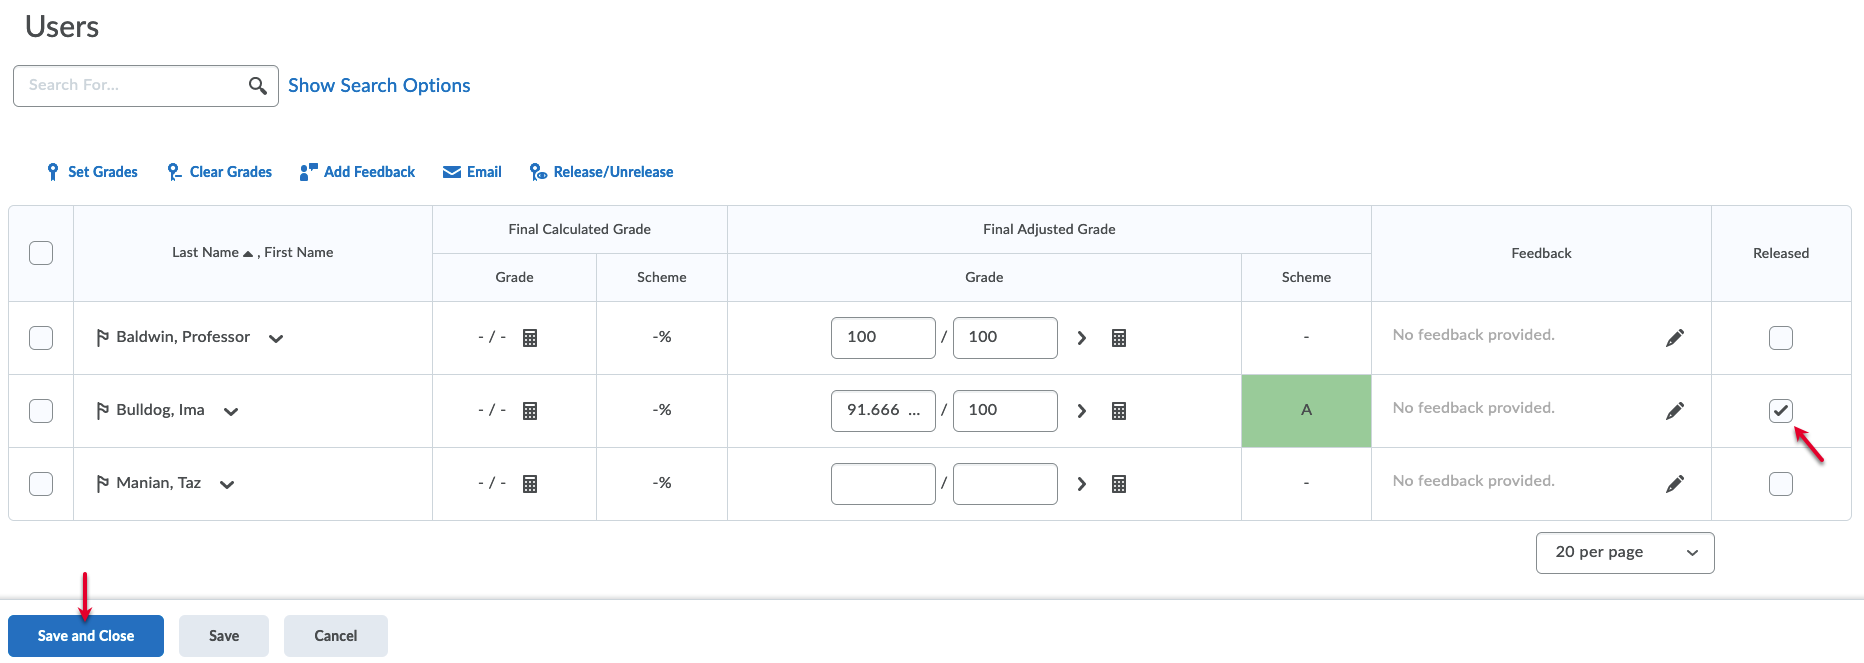 Select the Release Adjusted Final Grade check box for the user you want to release, and click Save and Close.